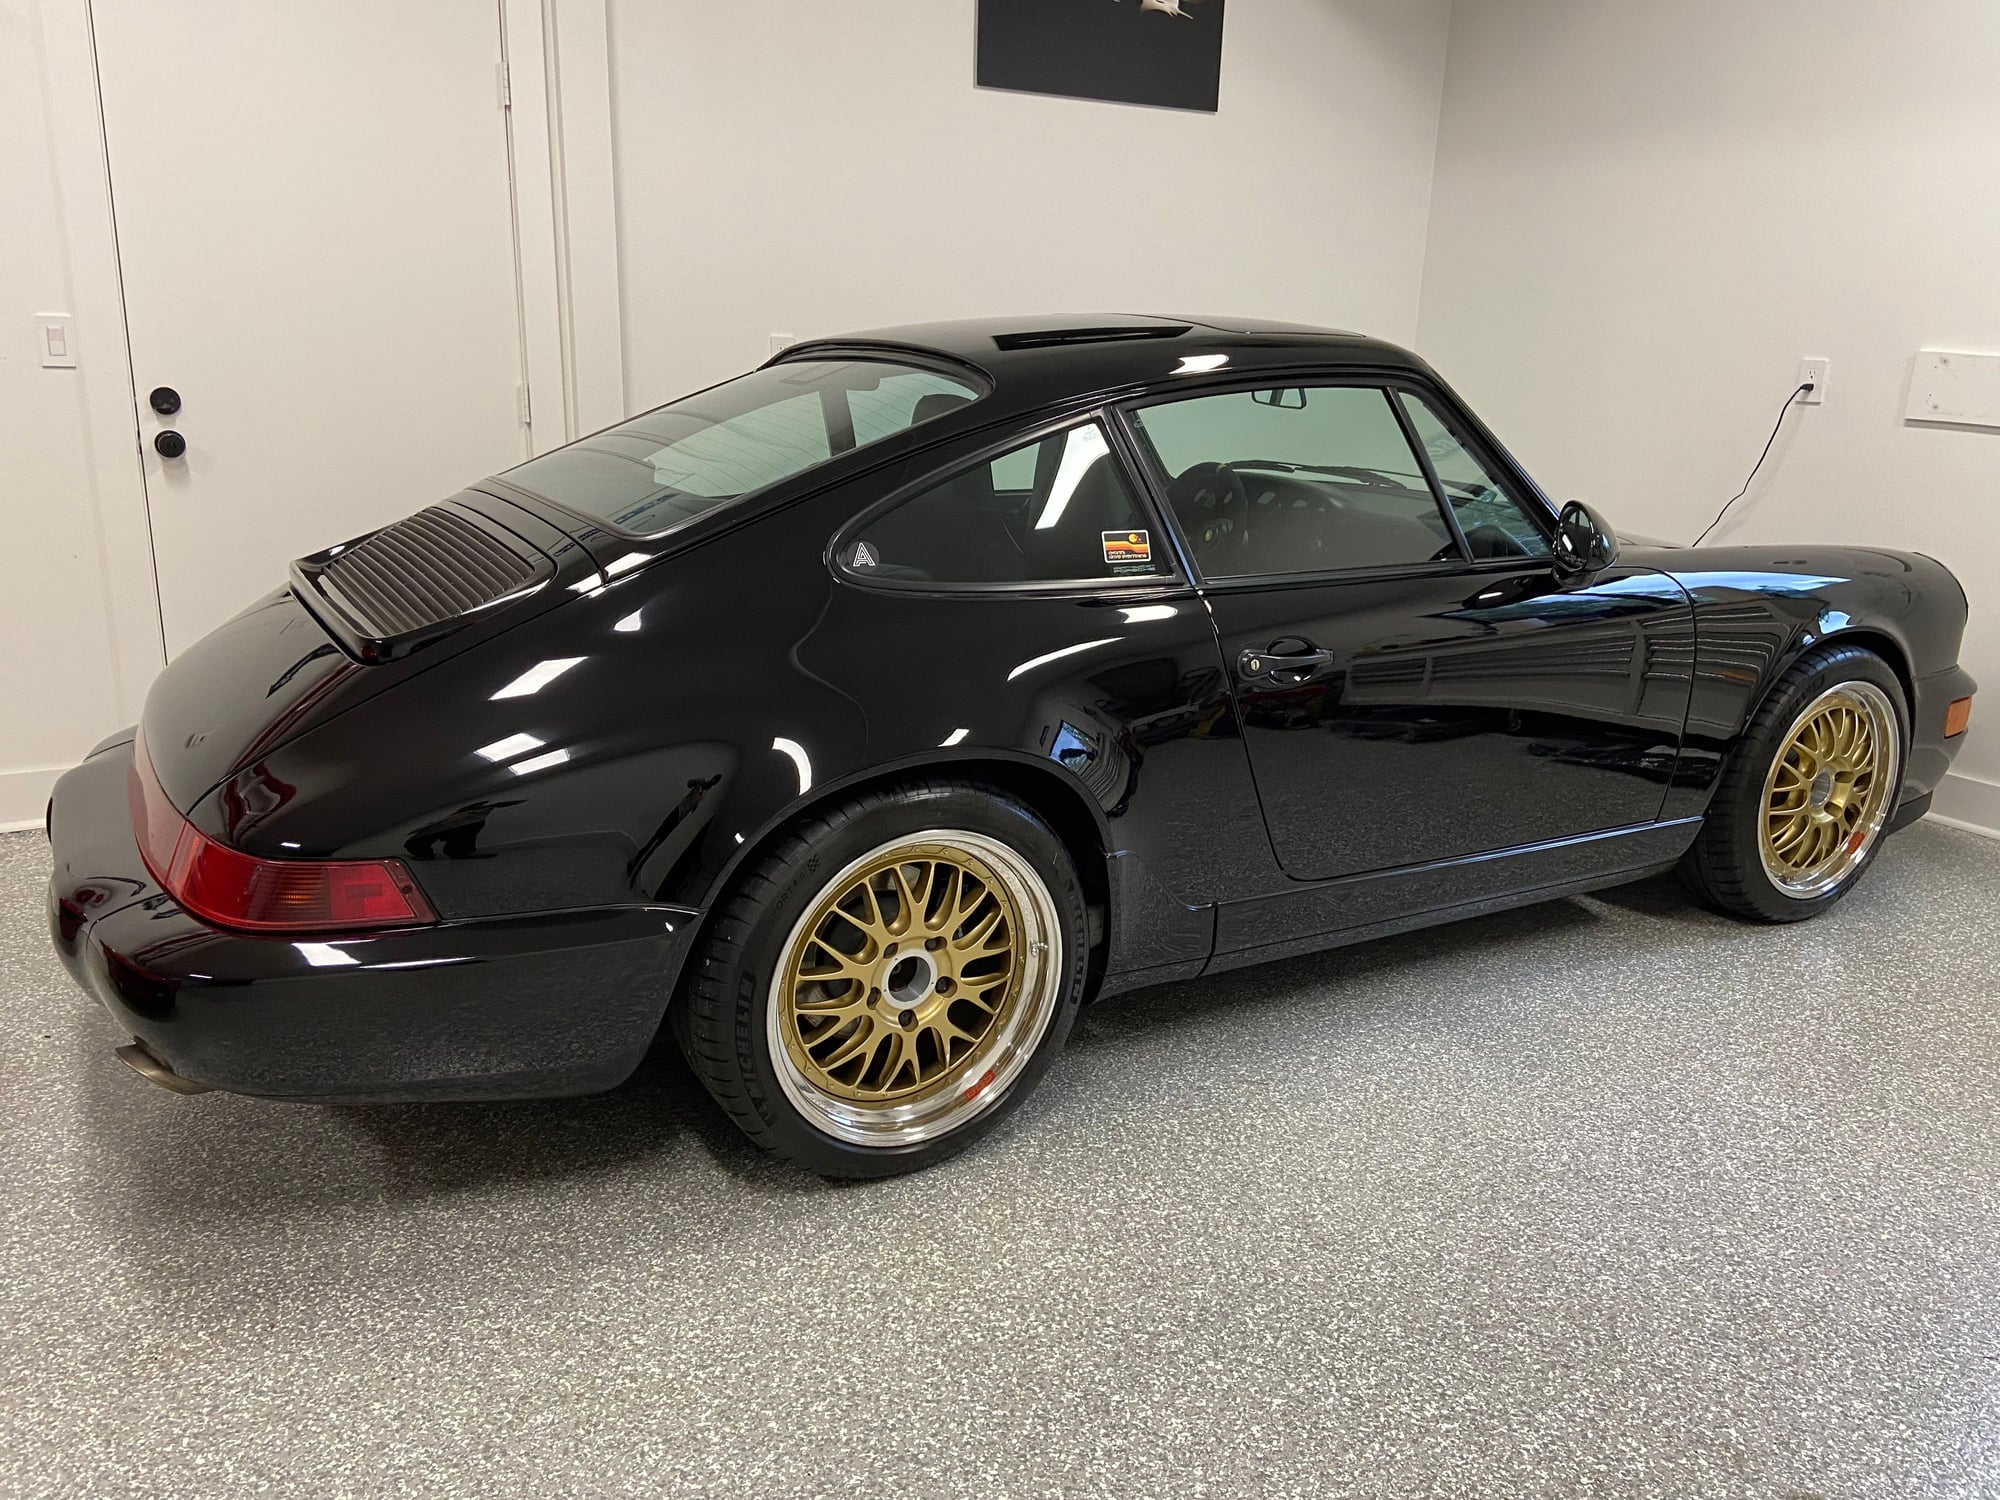 1991 Porsche 911 - 1991 C2 964 - Used - VIN WP012345678901234 - 80,000 Miles - 6 cyl - 2WD - Manual - Coupe - Black - Seatte, WA 98136, United States